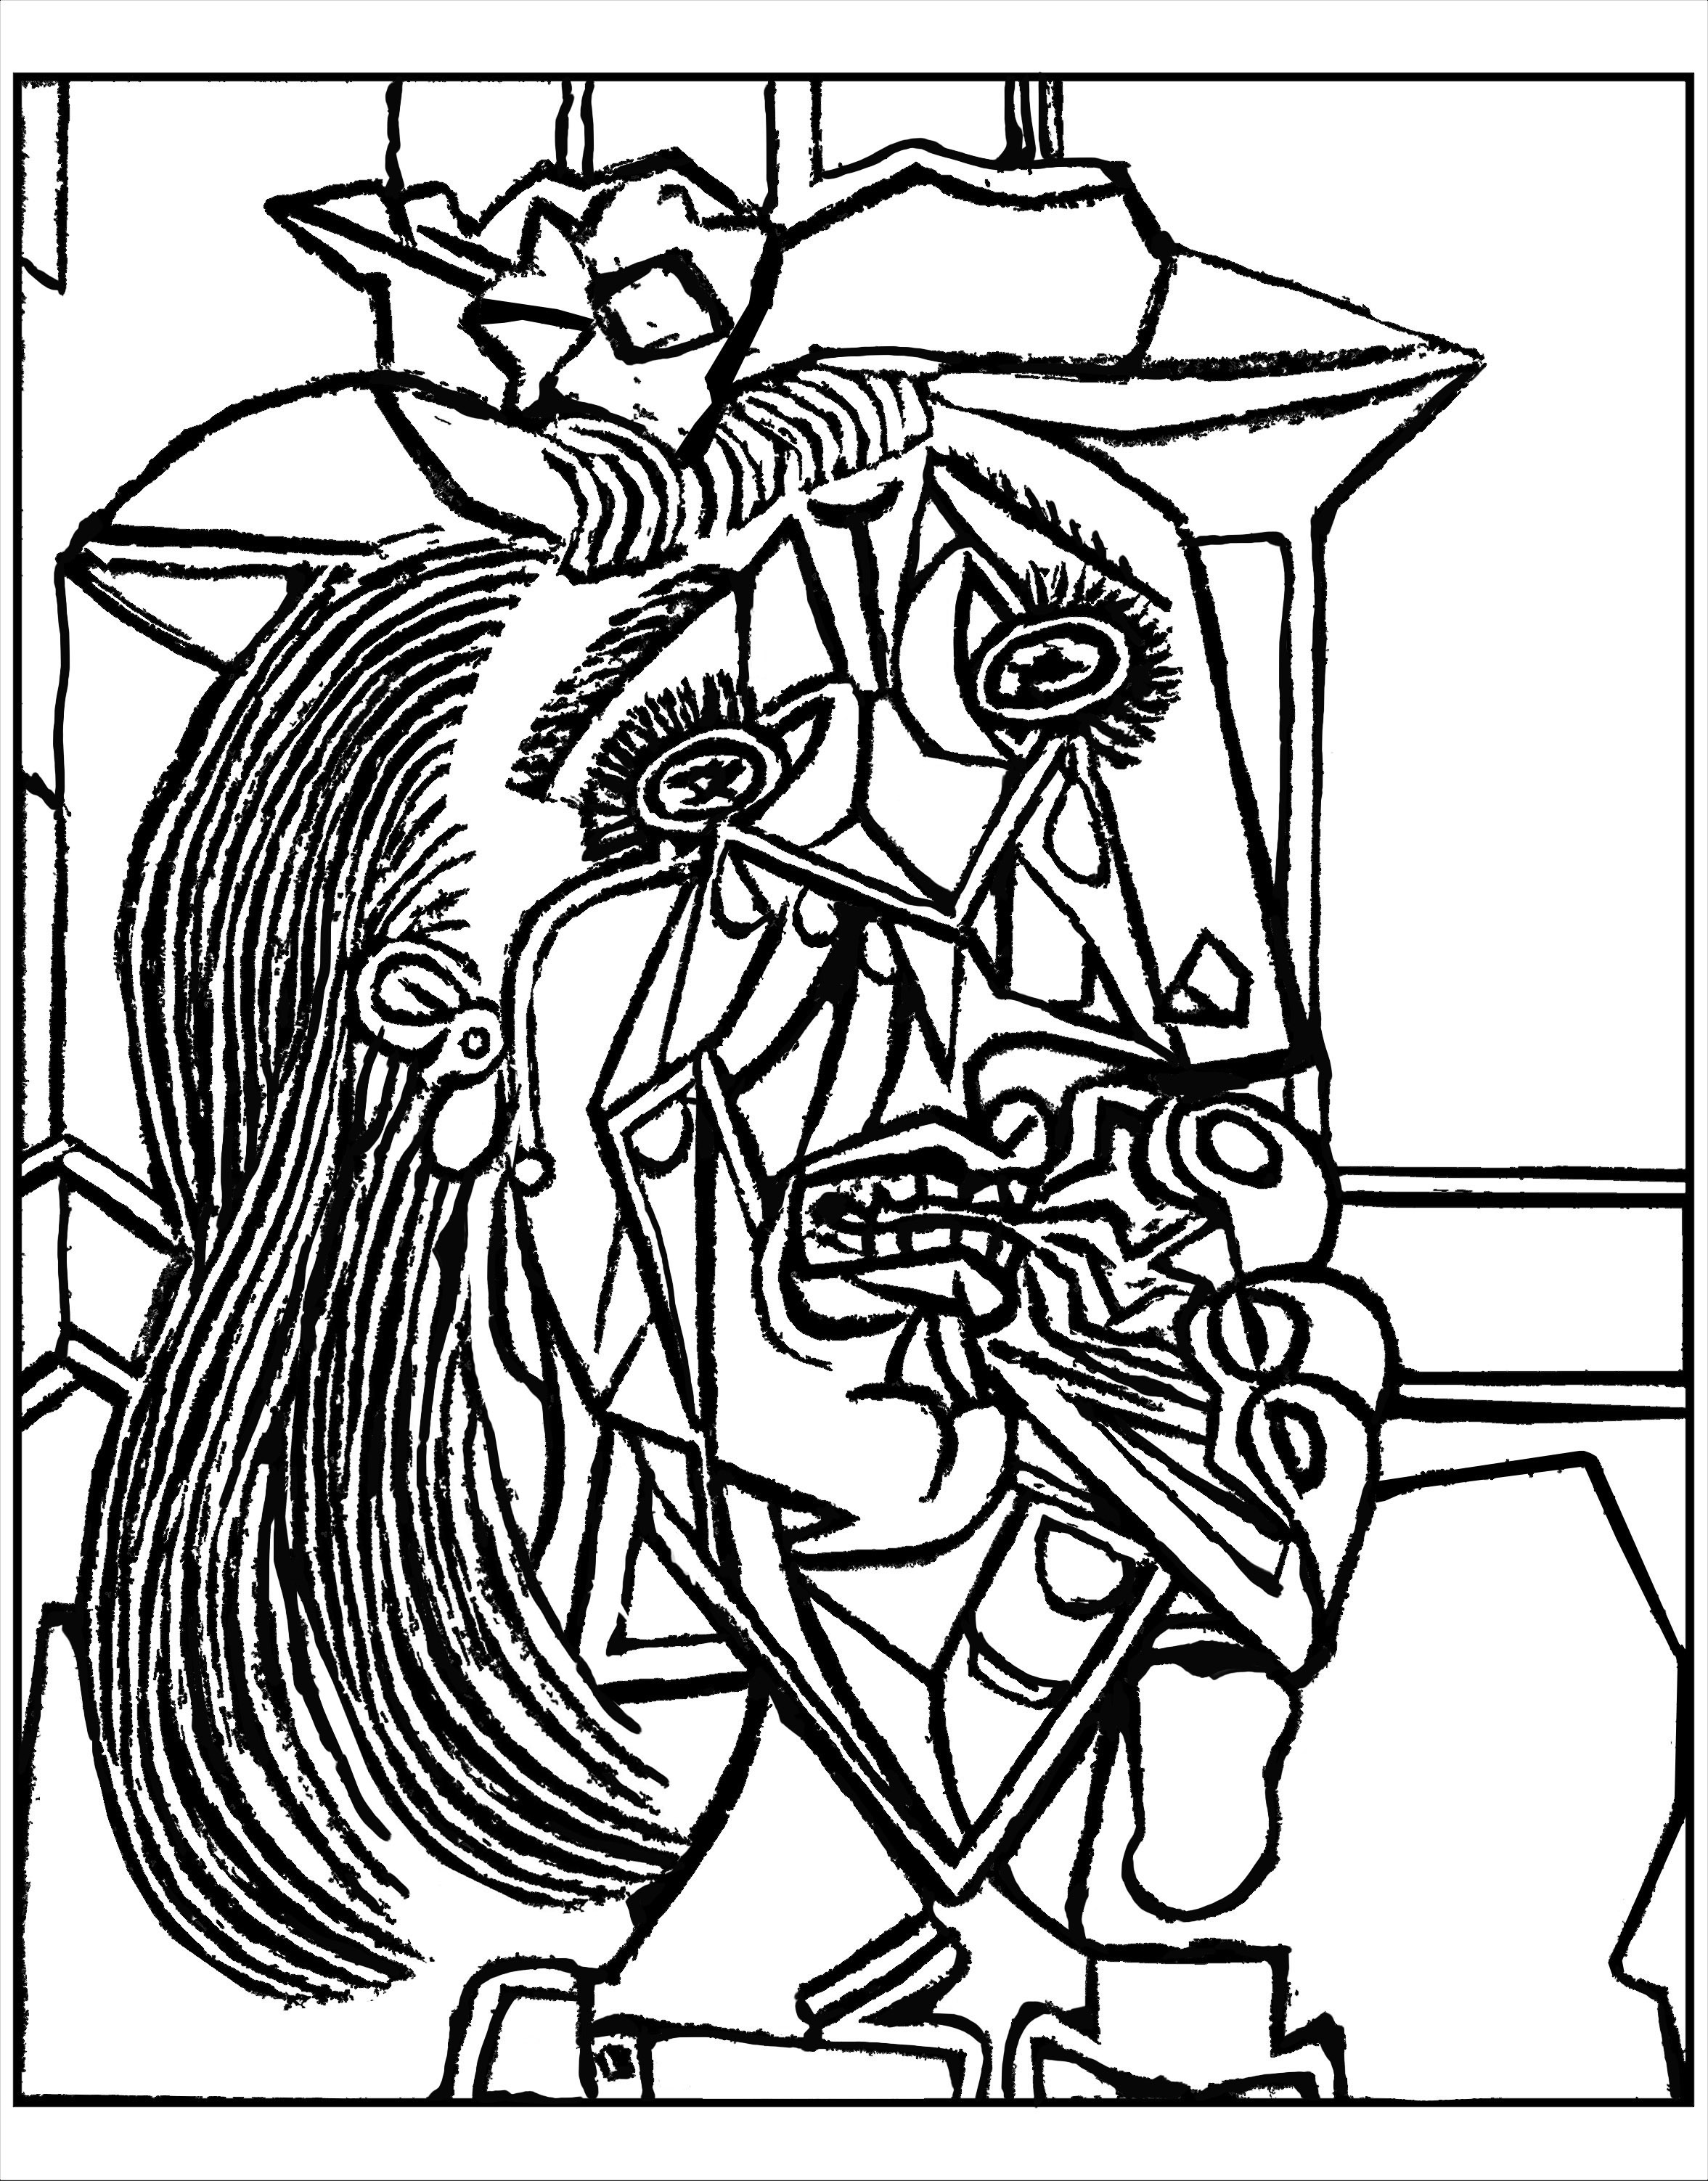 Coloring page created from Picasso's masterpiece 'Weeping woman' (1937)